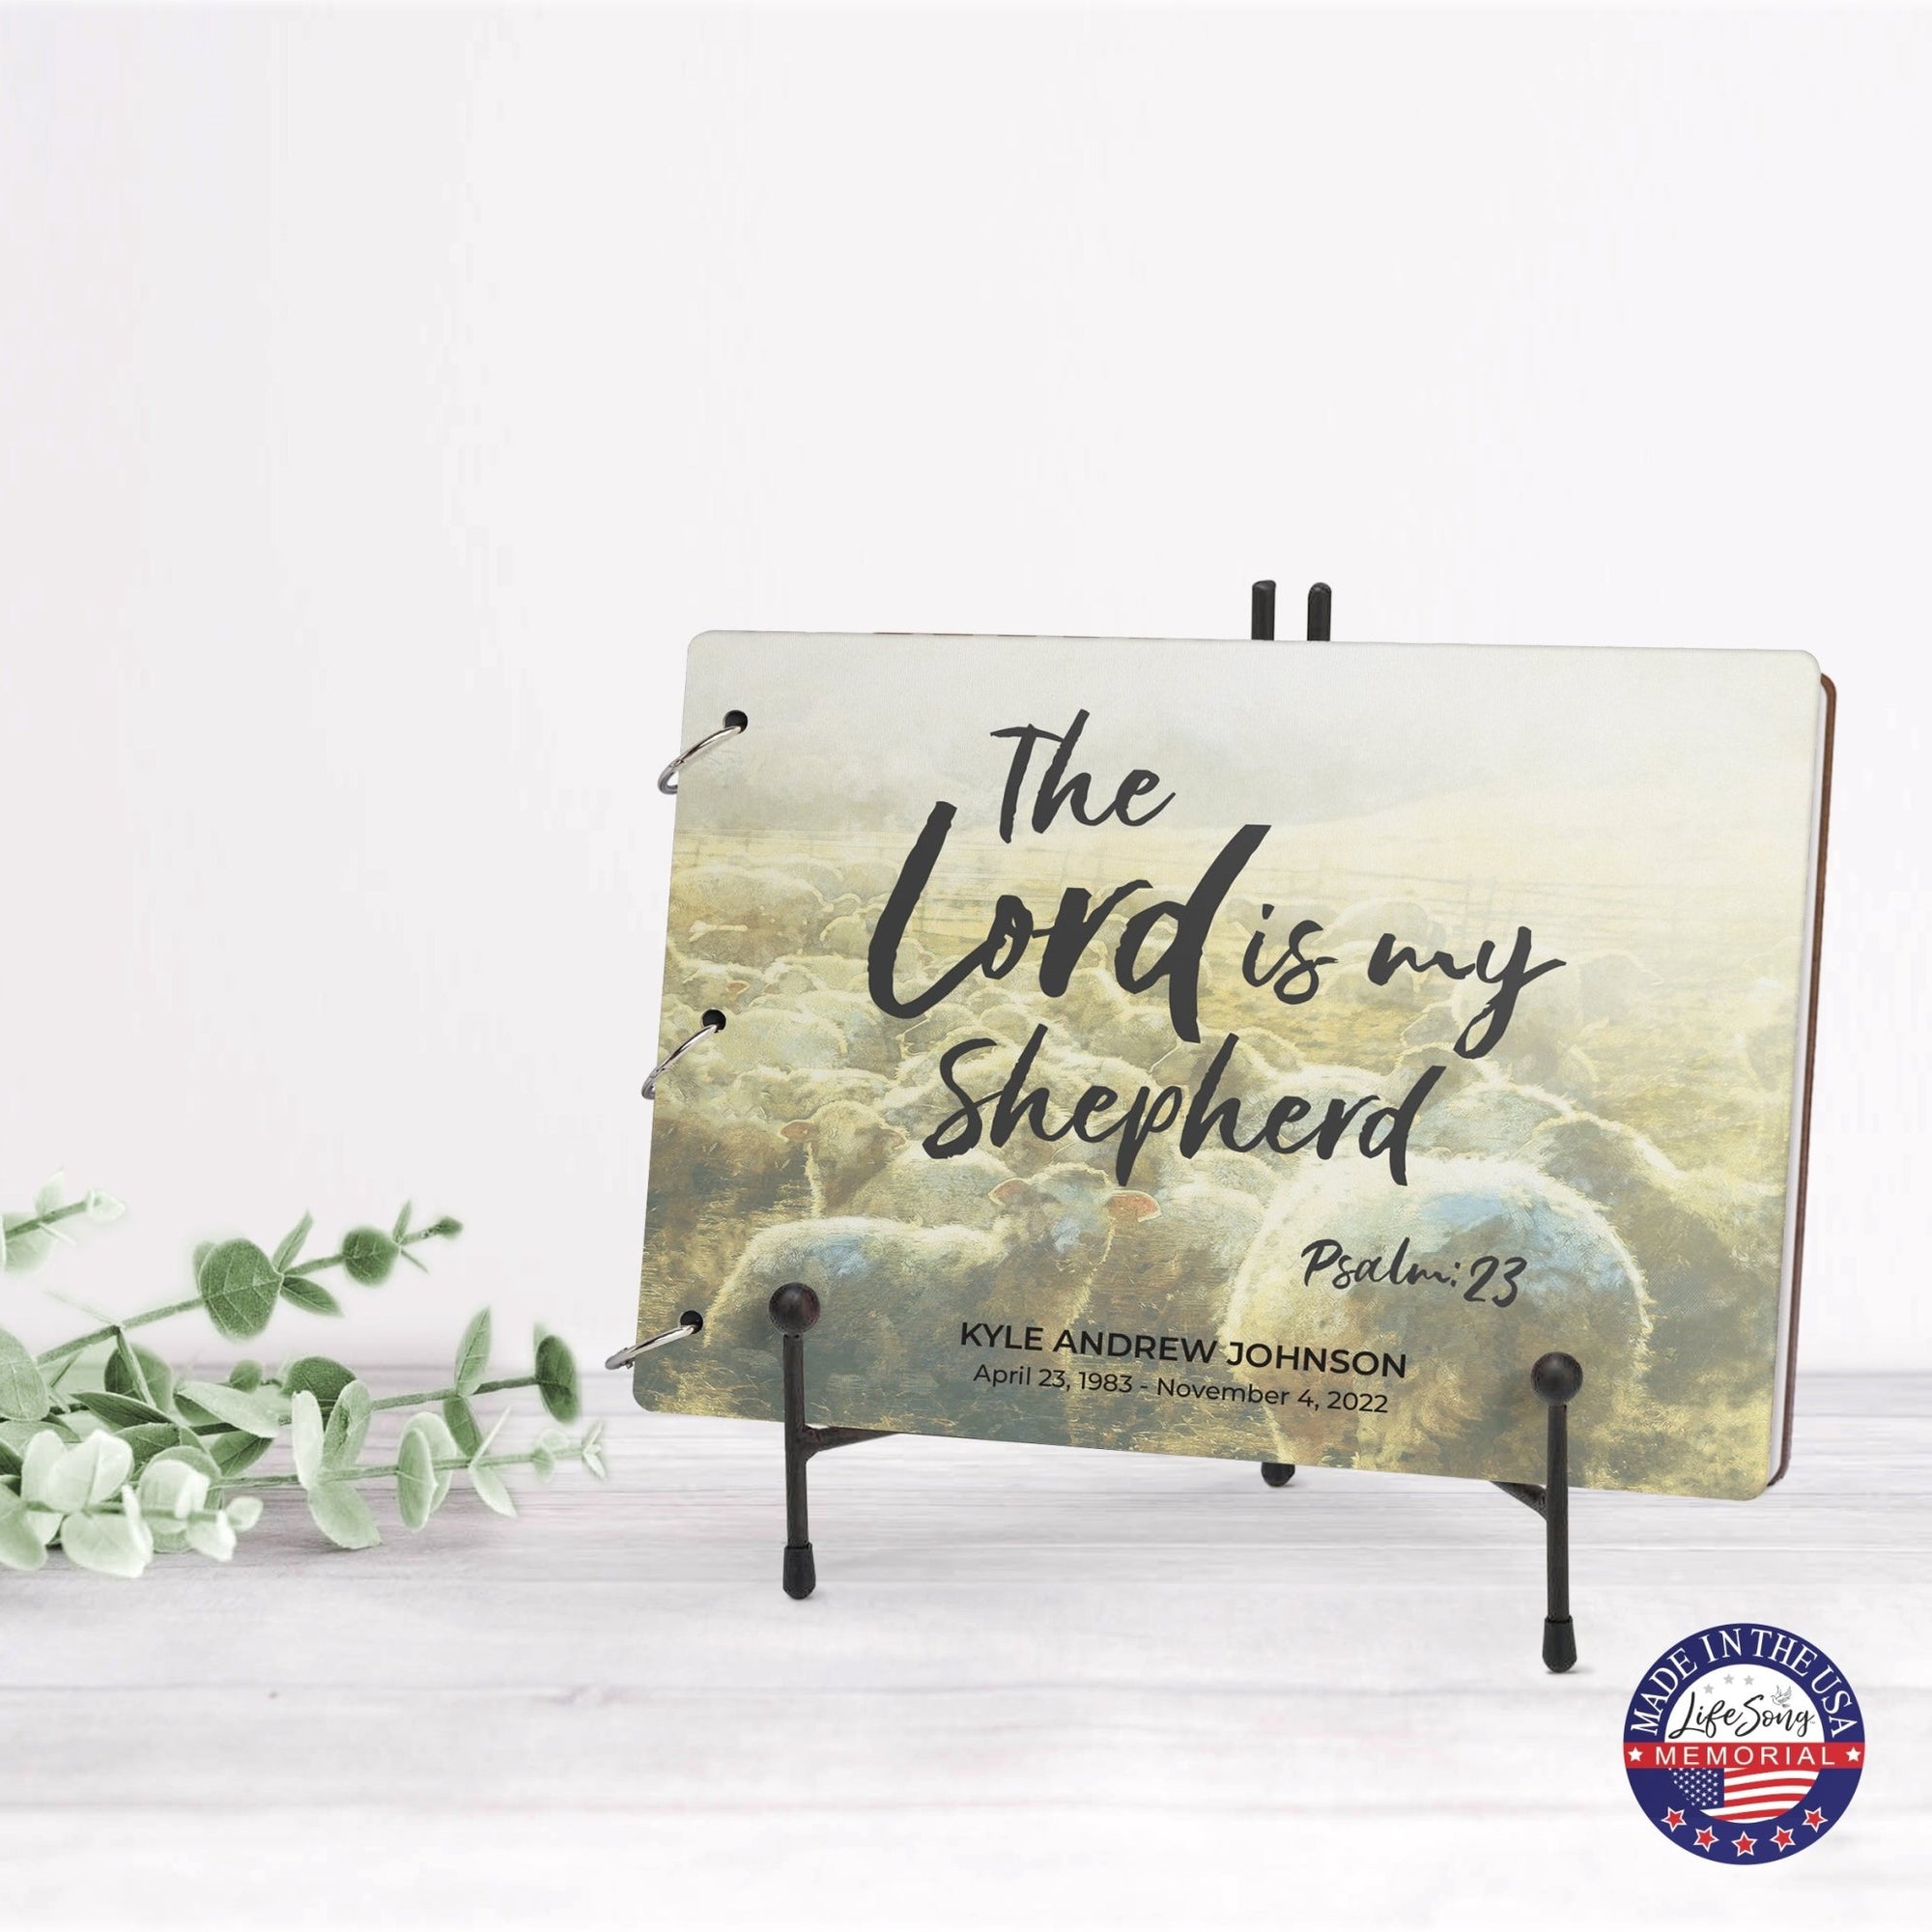 Personalized Celebration Of Life Funeral Guest Books For Memorial Services Registry With Wooden Cover - The Lord Is My Shepherd - LifeSong Milestones